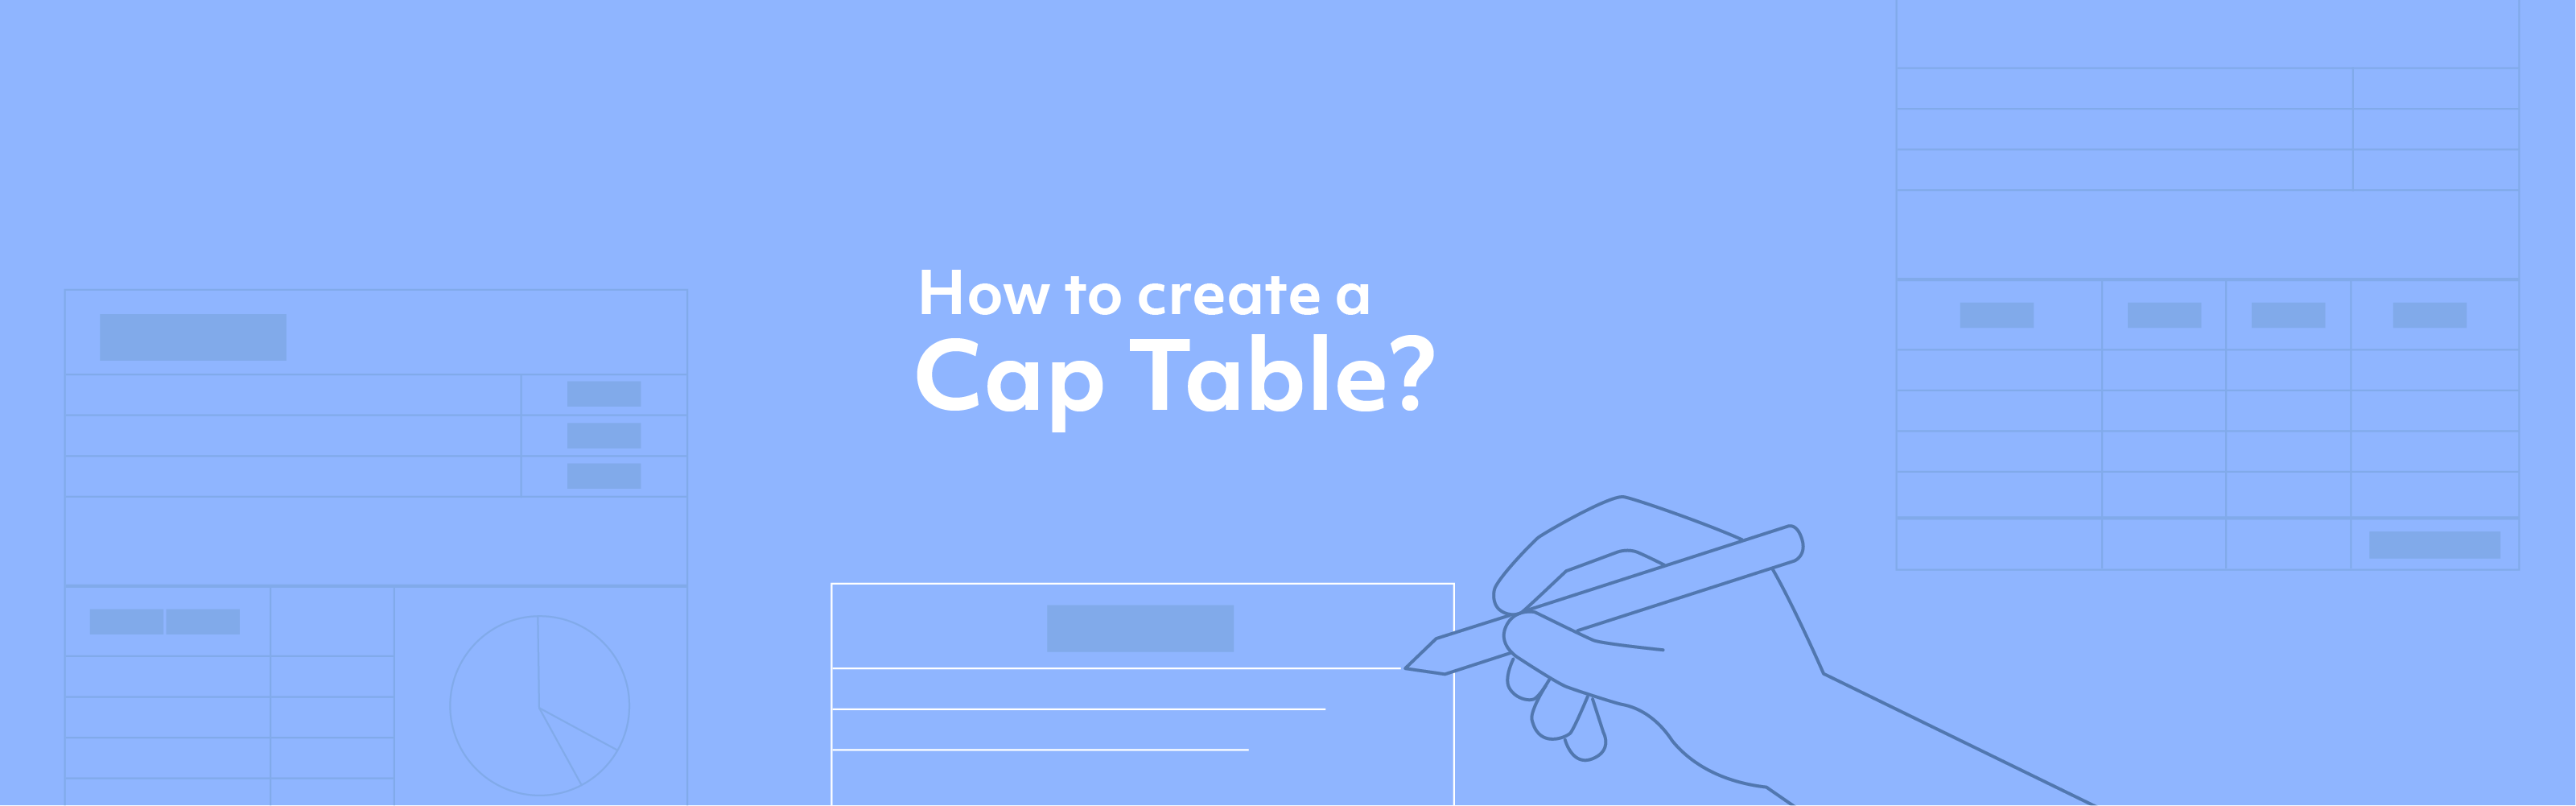 How to create a cap table